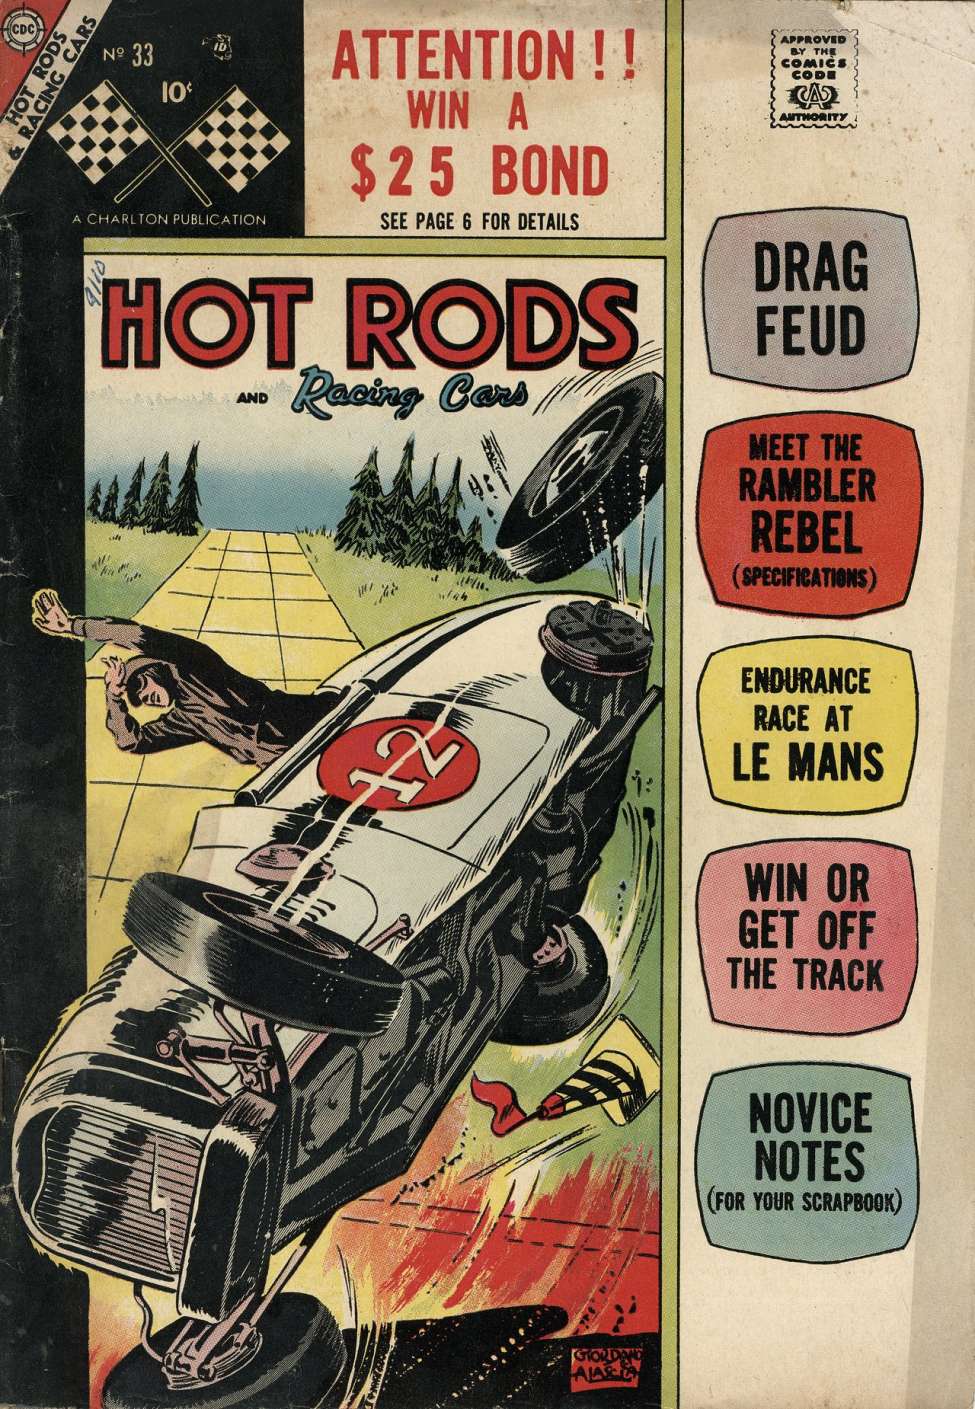 Comic Book Cover For Hot Rods and Racing Cars 33 - Version 2